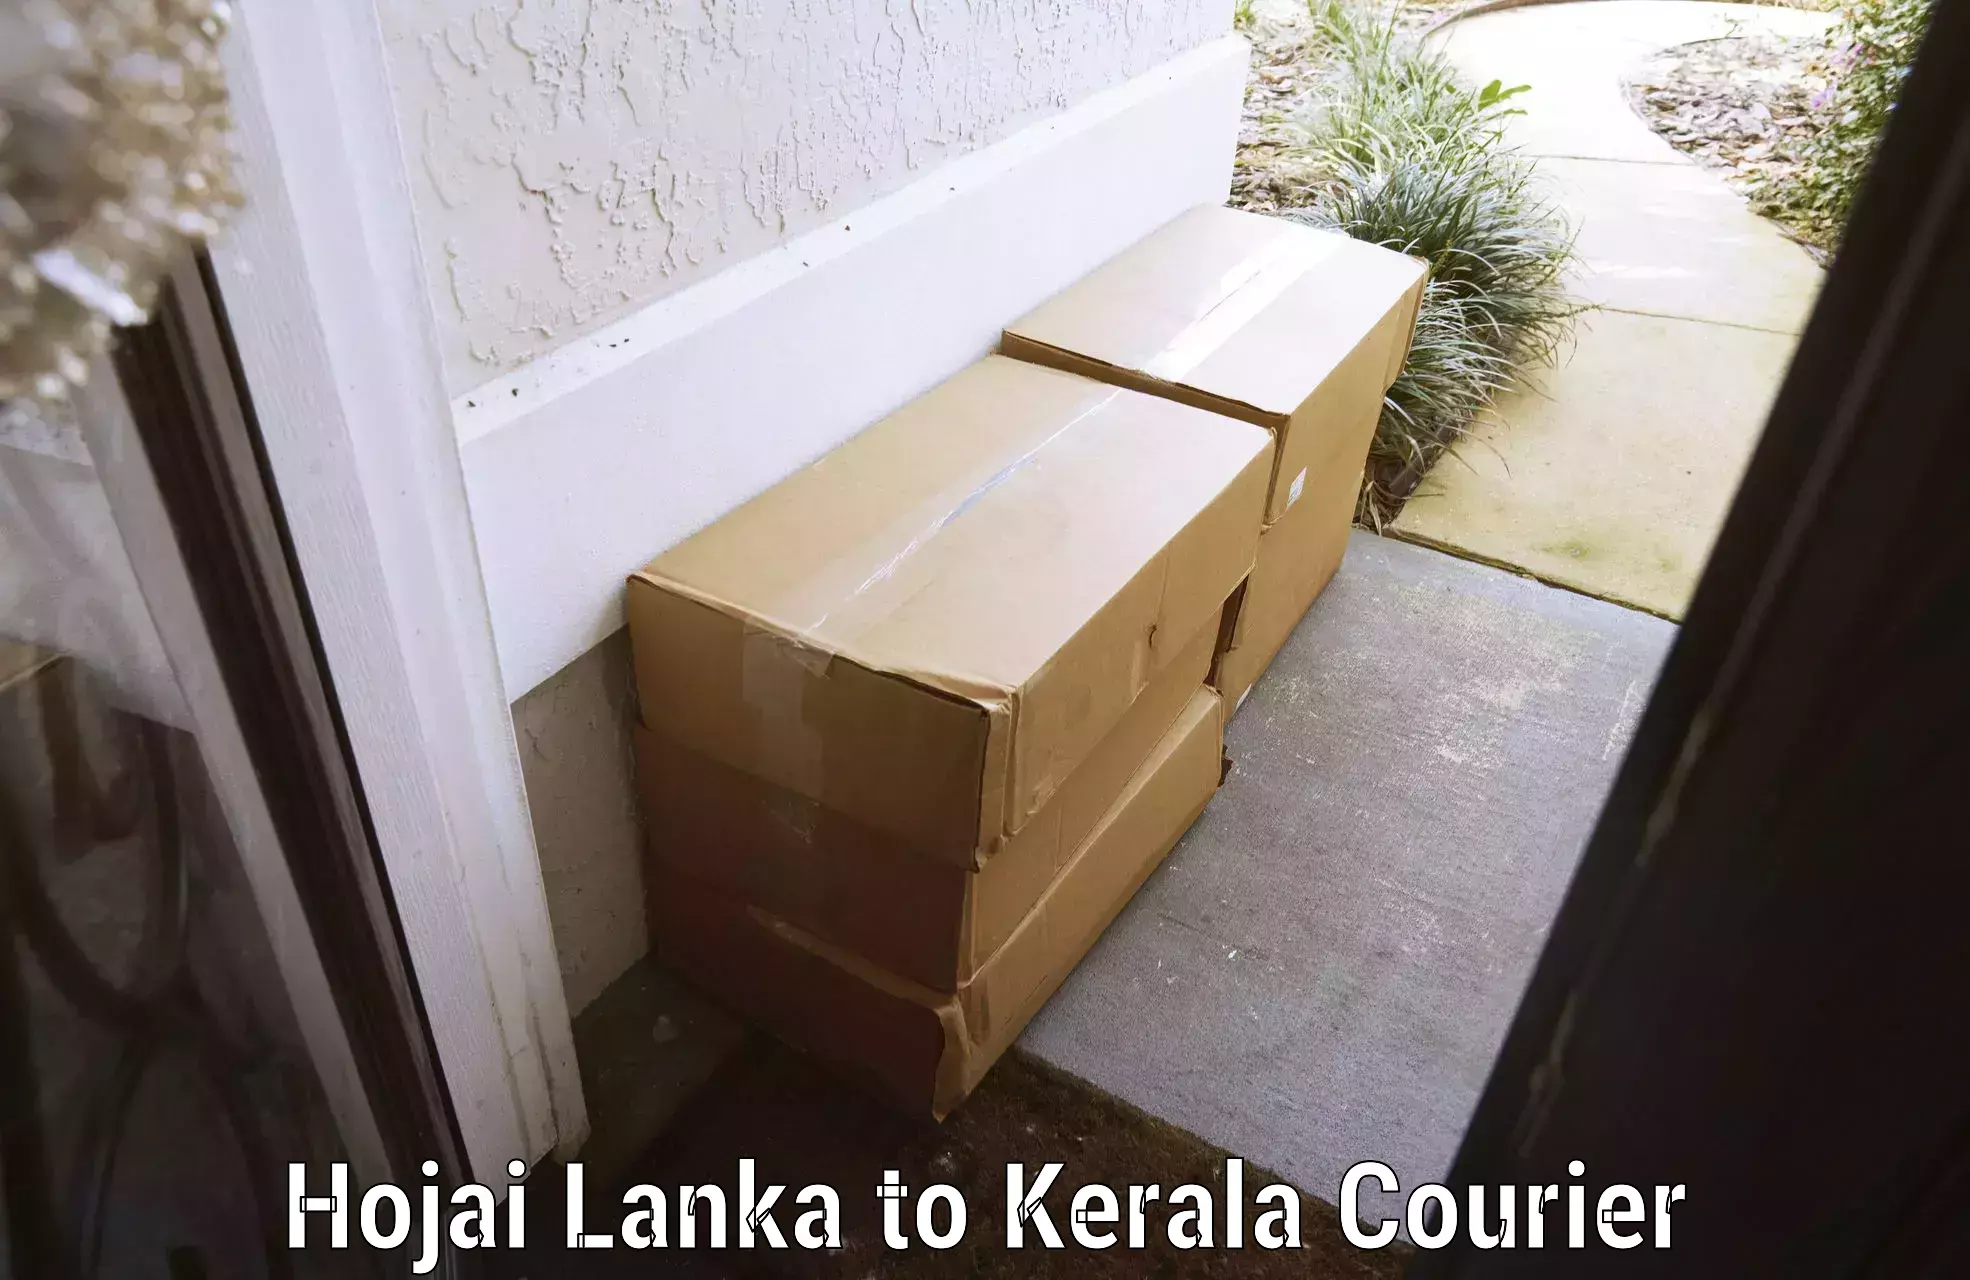 Personal effects shipping Hojai Lanka to Perumbavoor